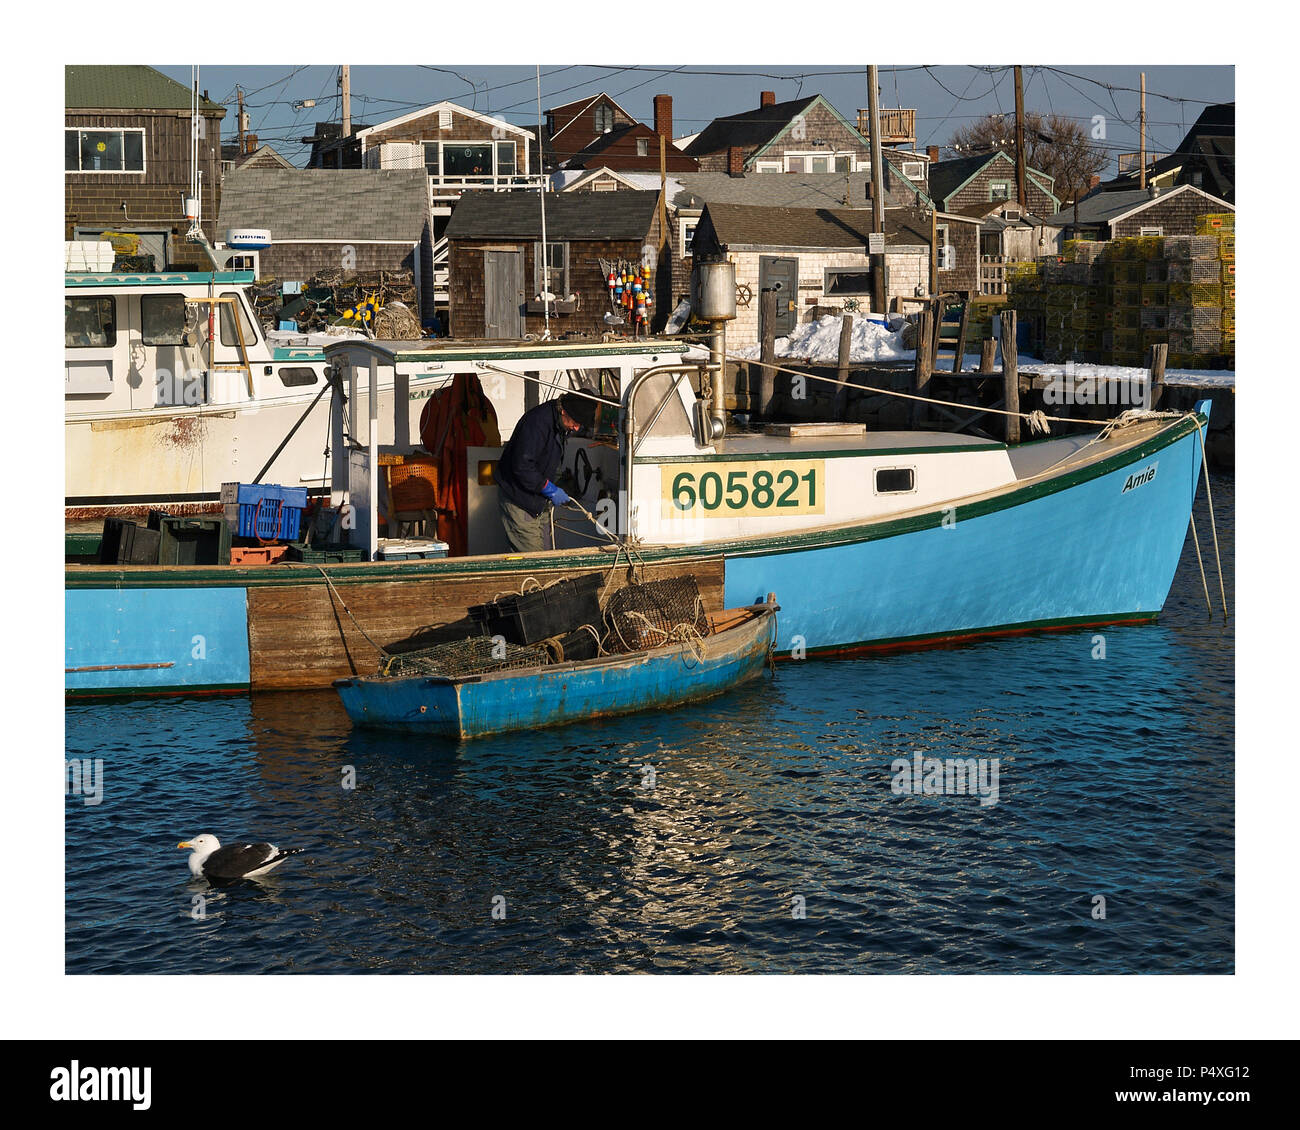 A working lobster boat in the harbor at Rockport, MA. Stock Photo